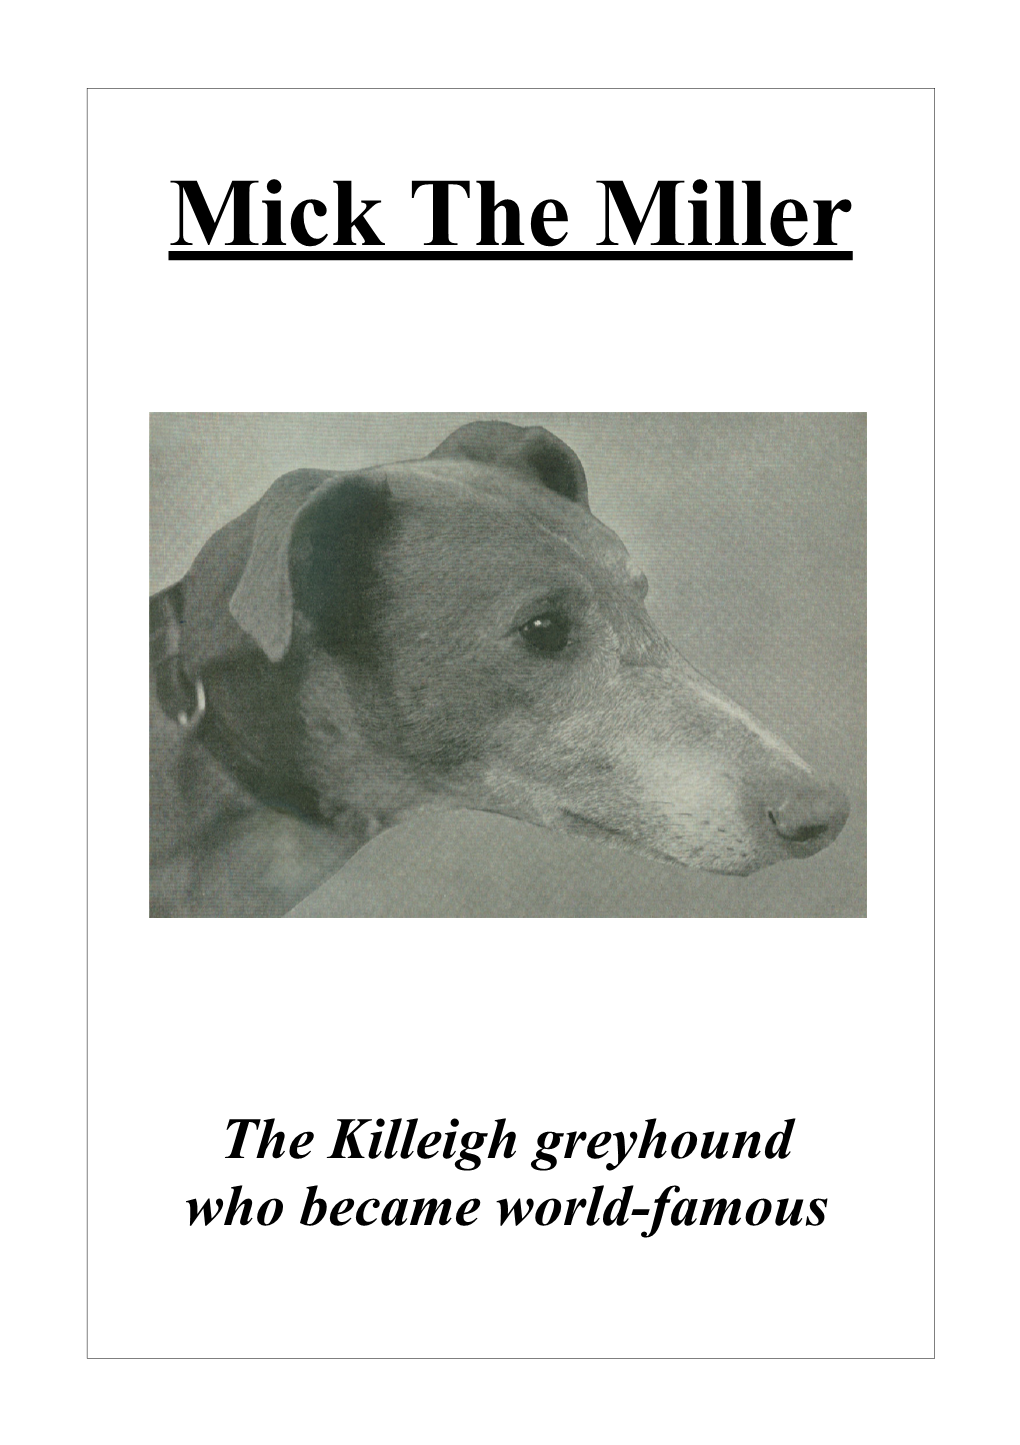 Copy with Pics 2 Mick the Miller For